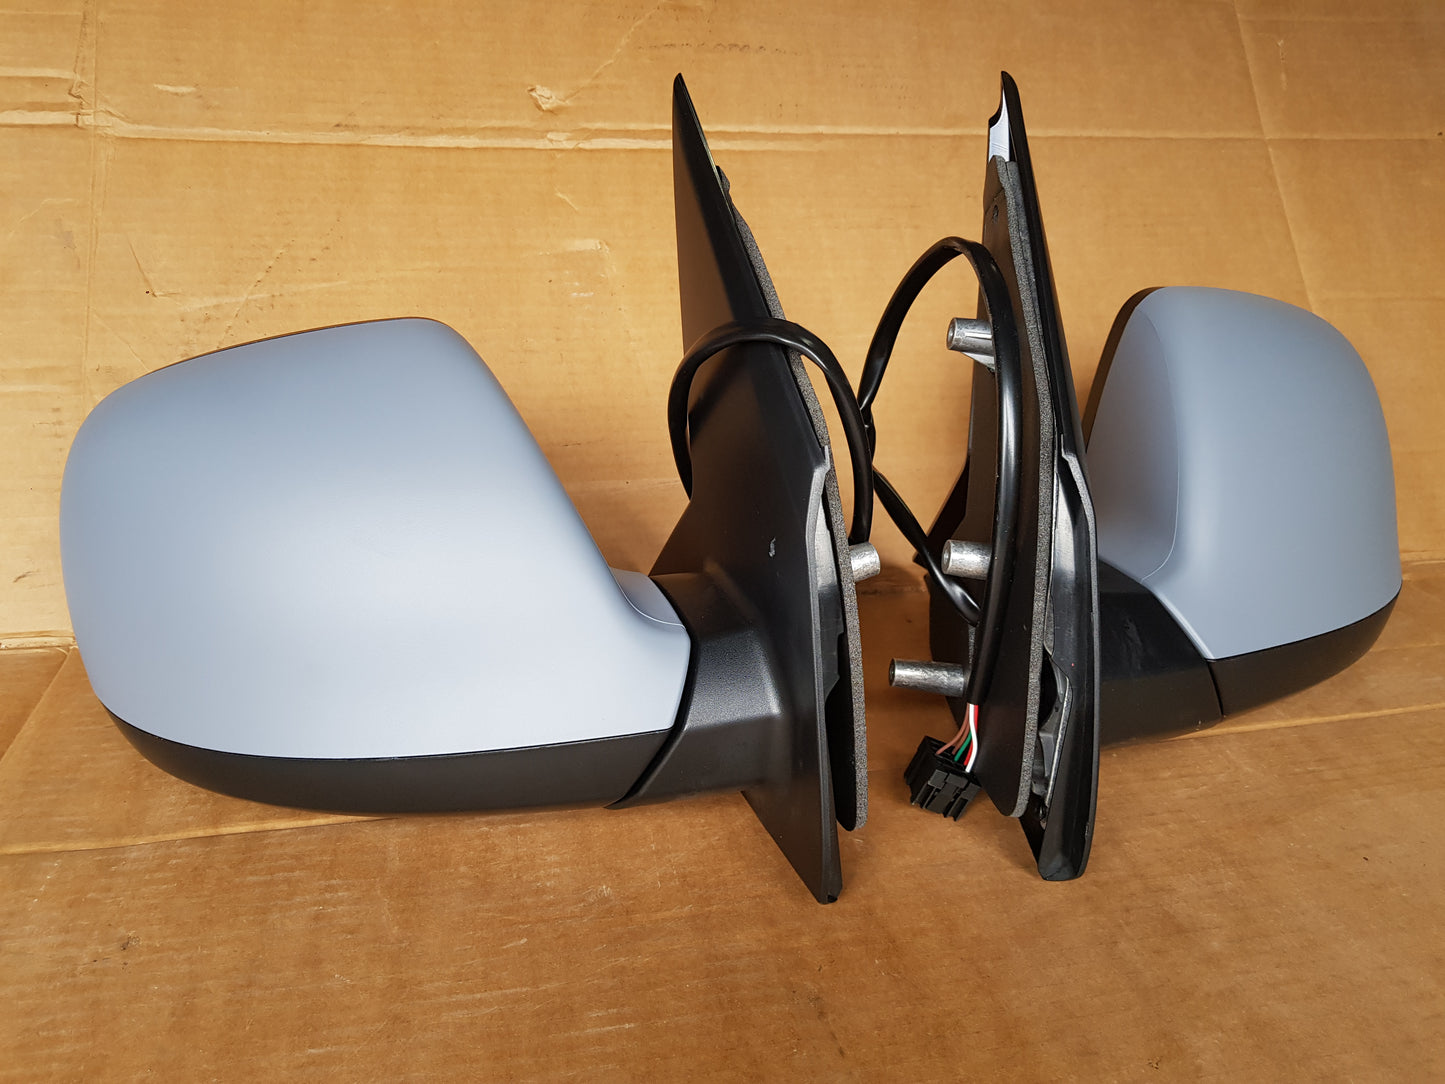 VW T6 T6.1 Transporter Caravelle Front Cab Side Door Wing Mirror Electric adjust heated glass with Primed cover RIGHT SIDE